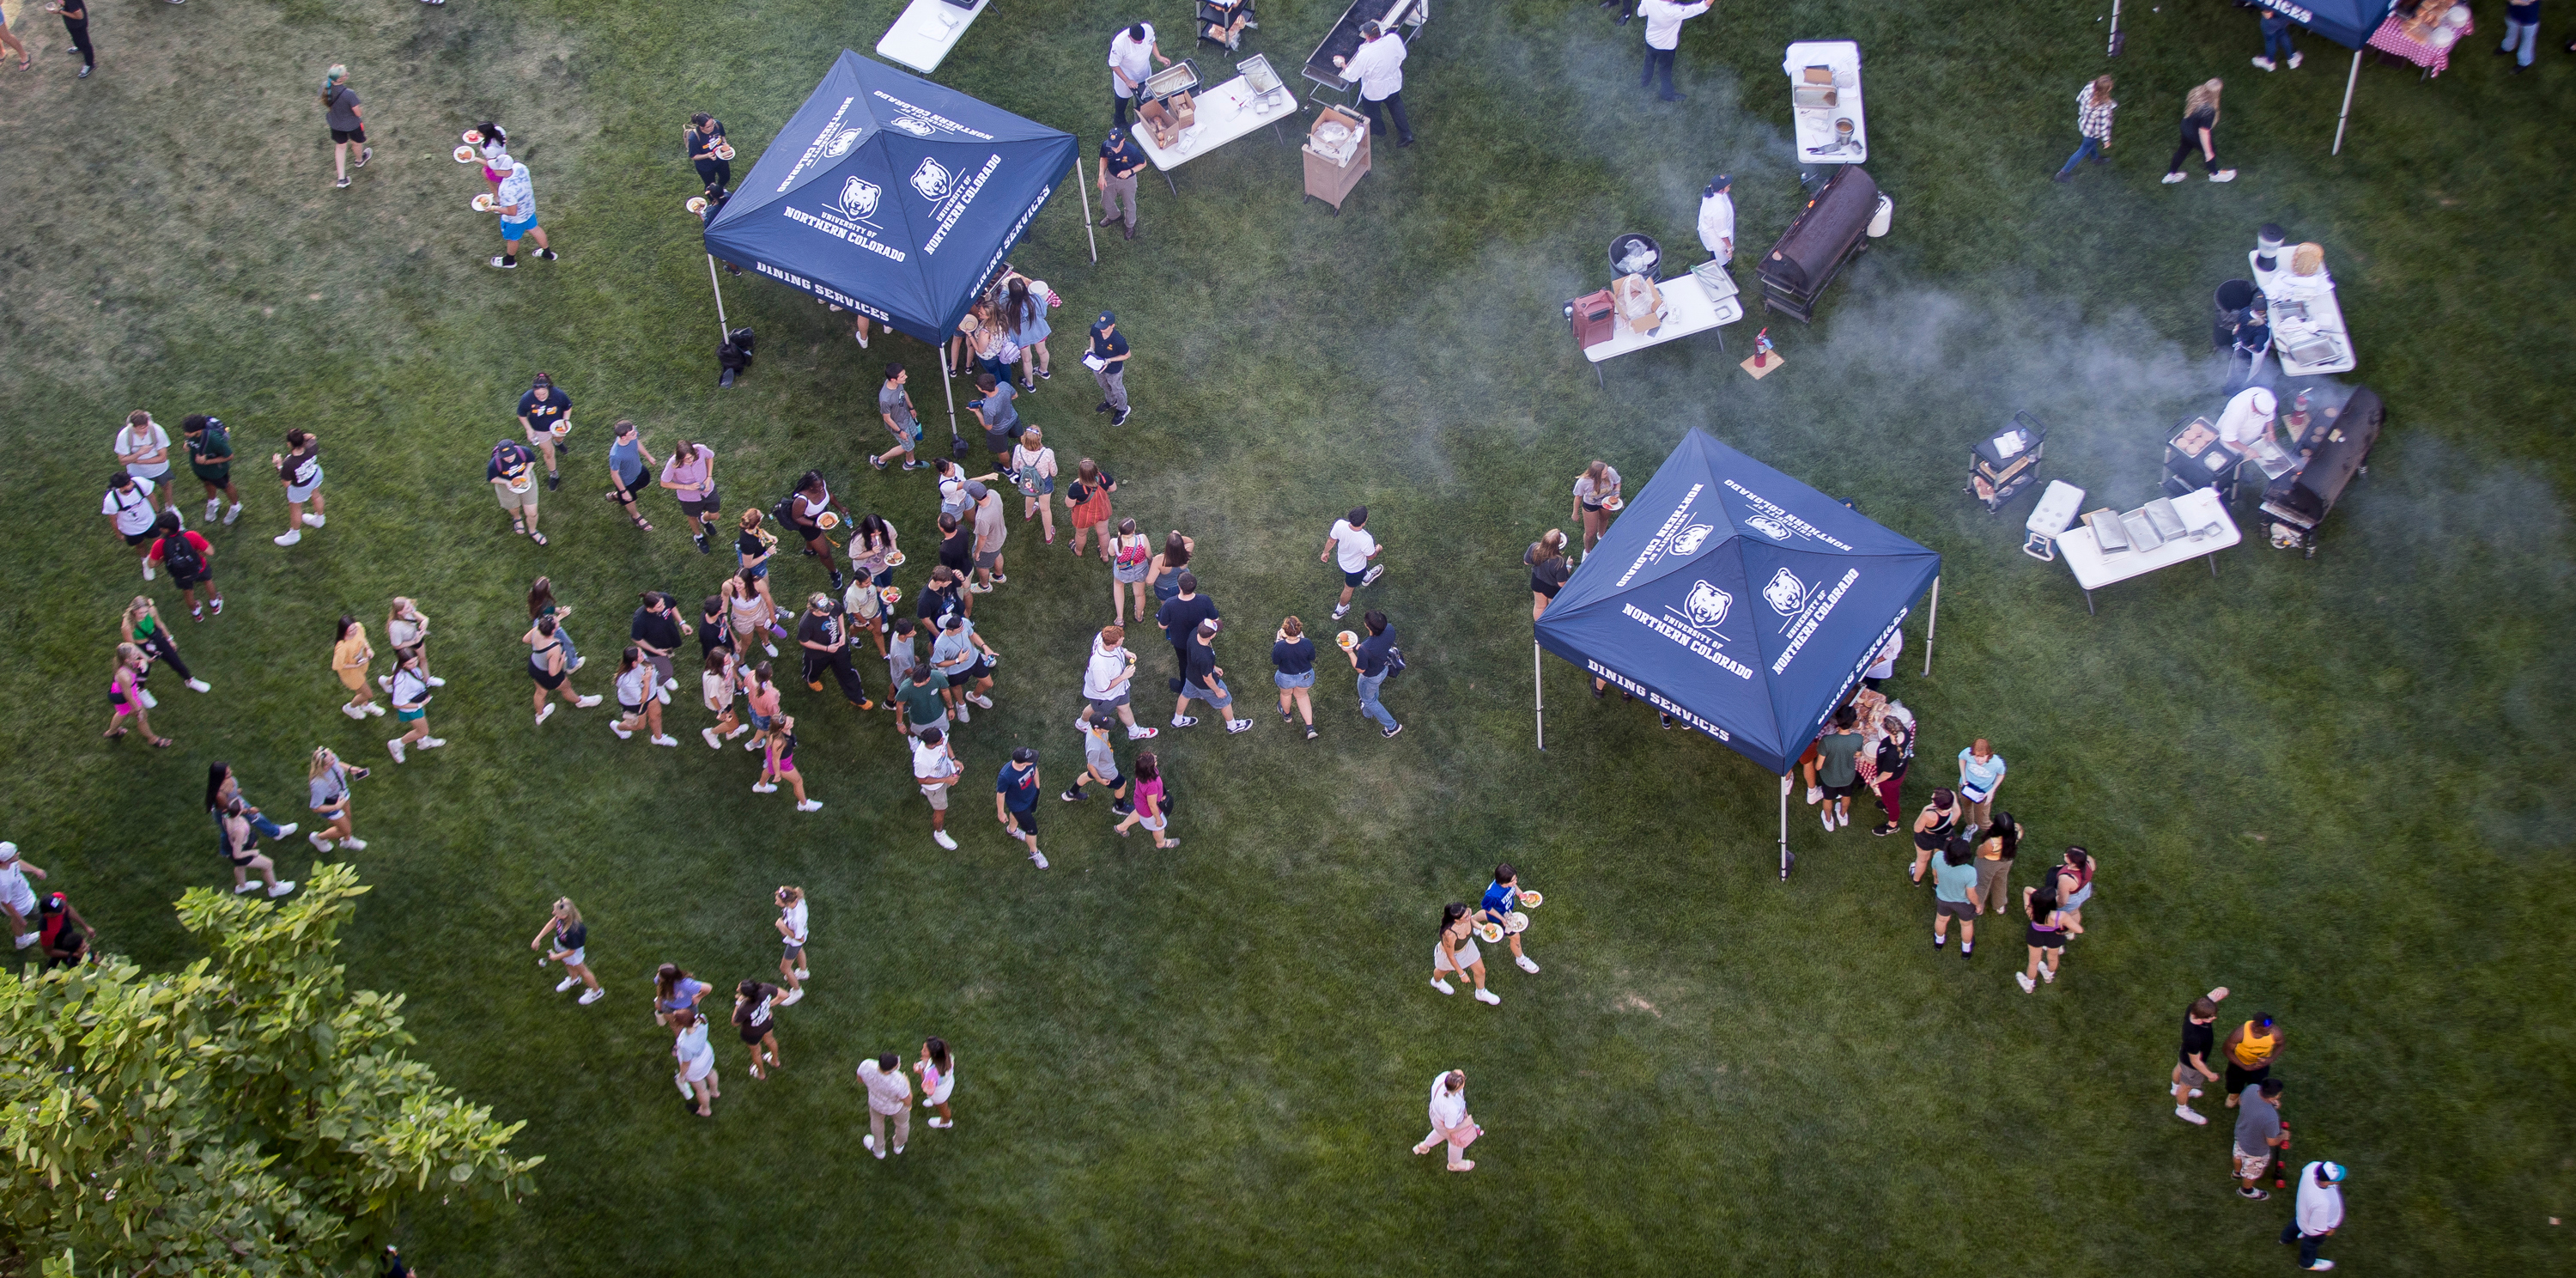 An overhead shot of new students walking around a grassy area on campus